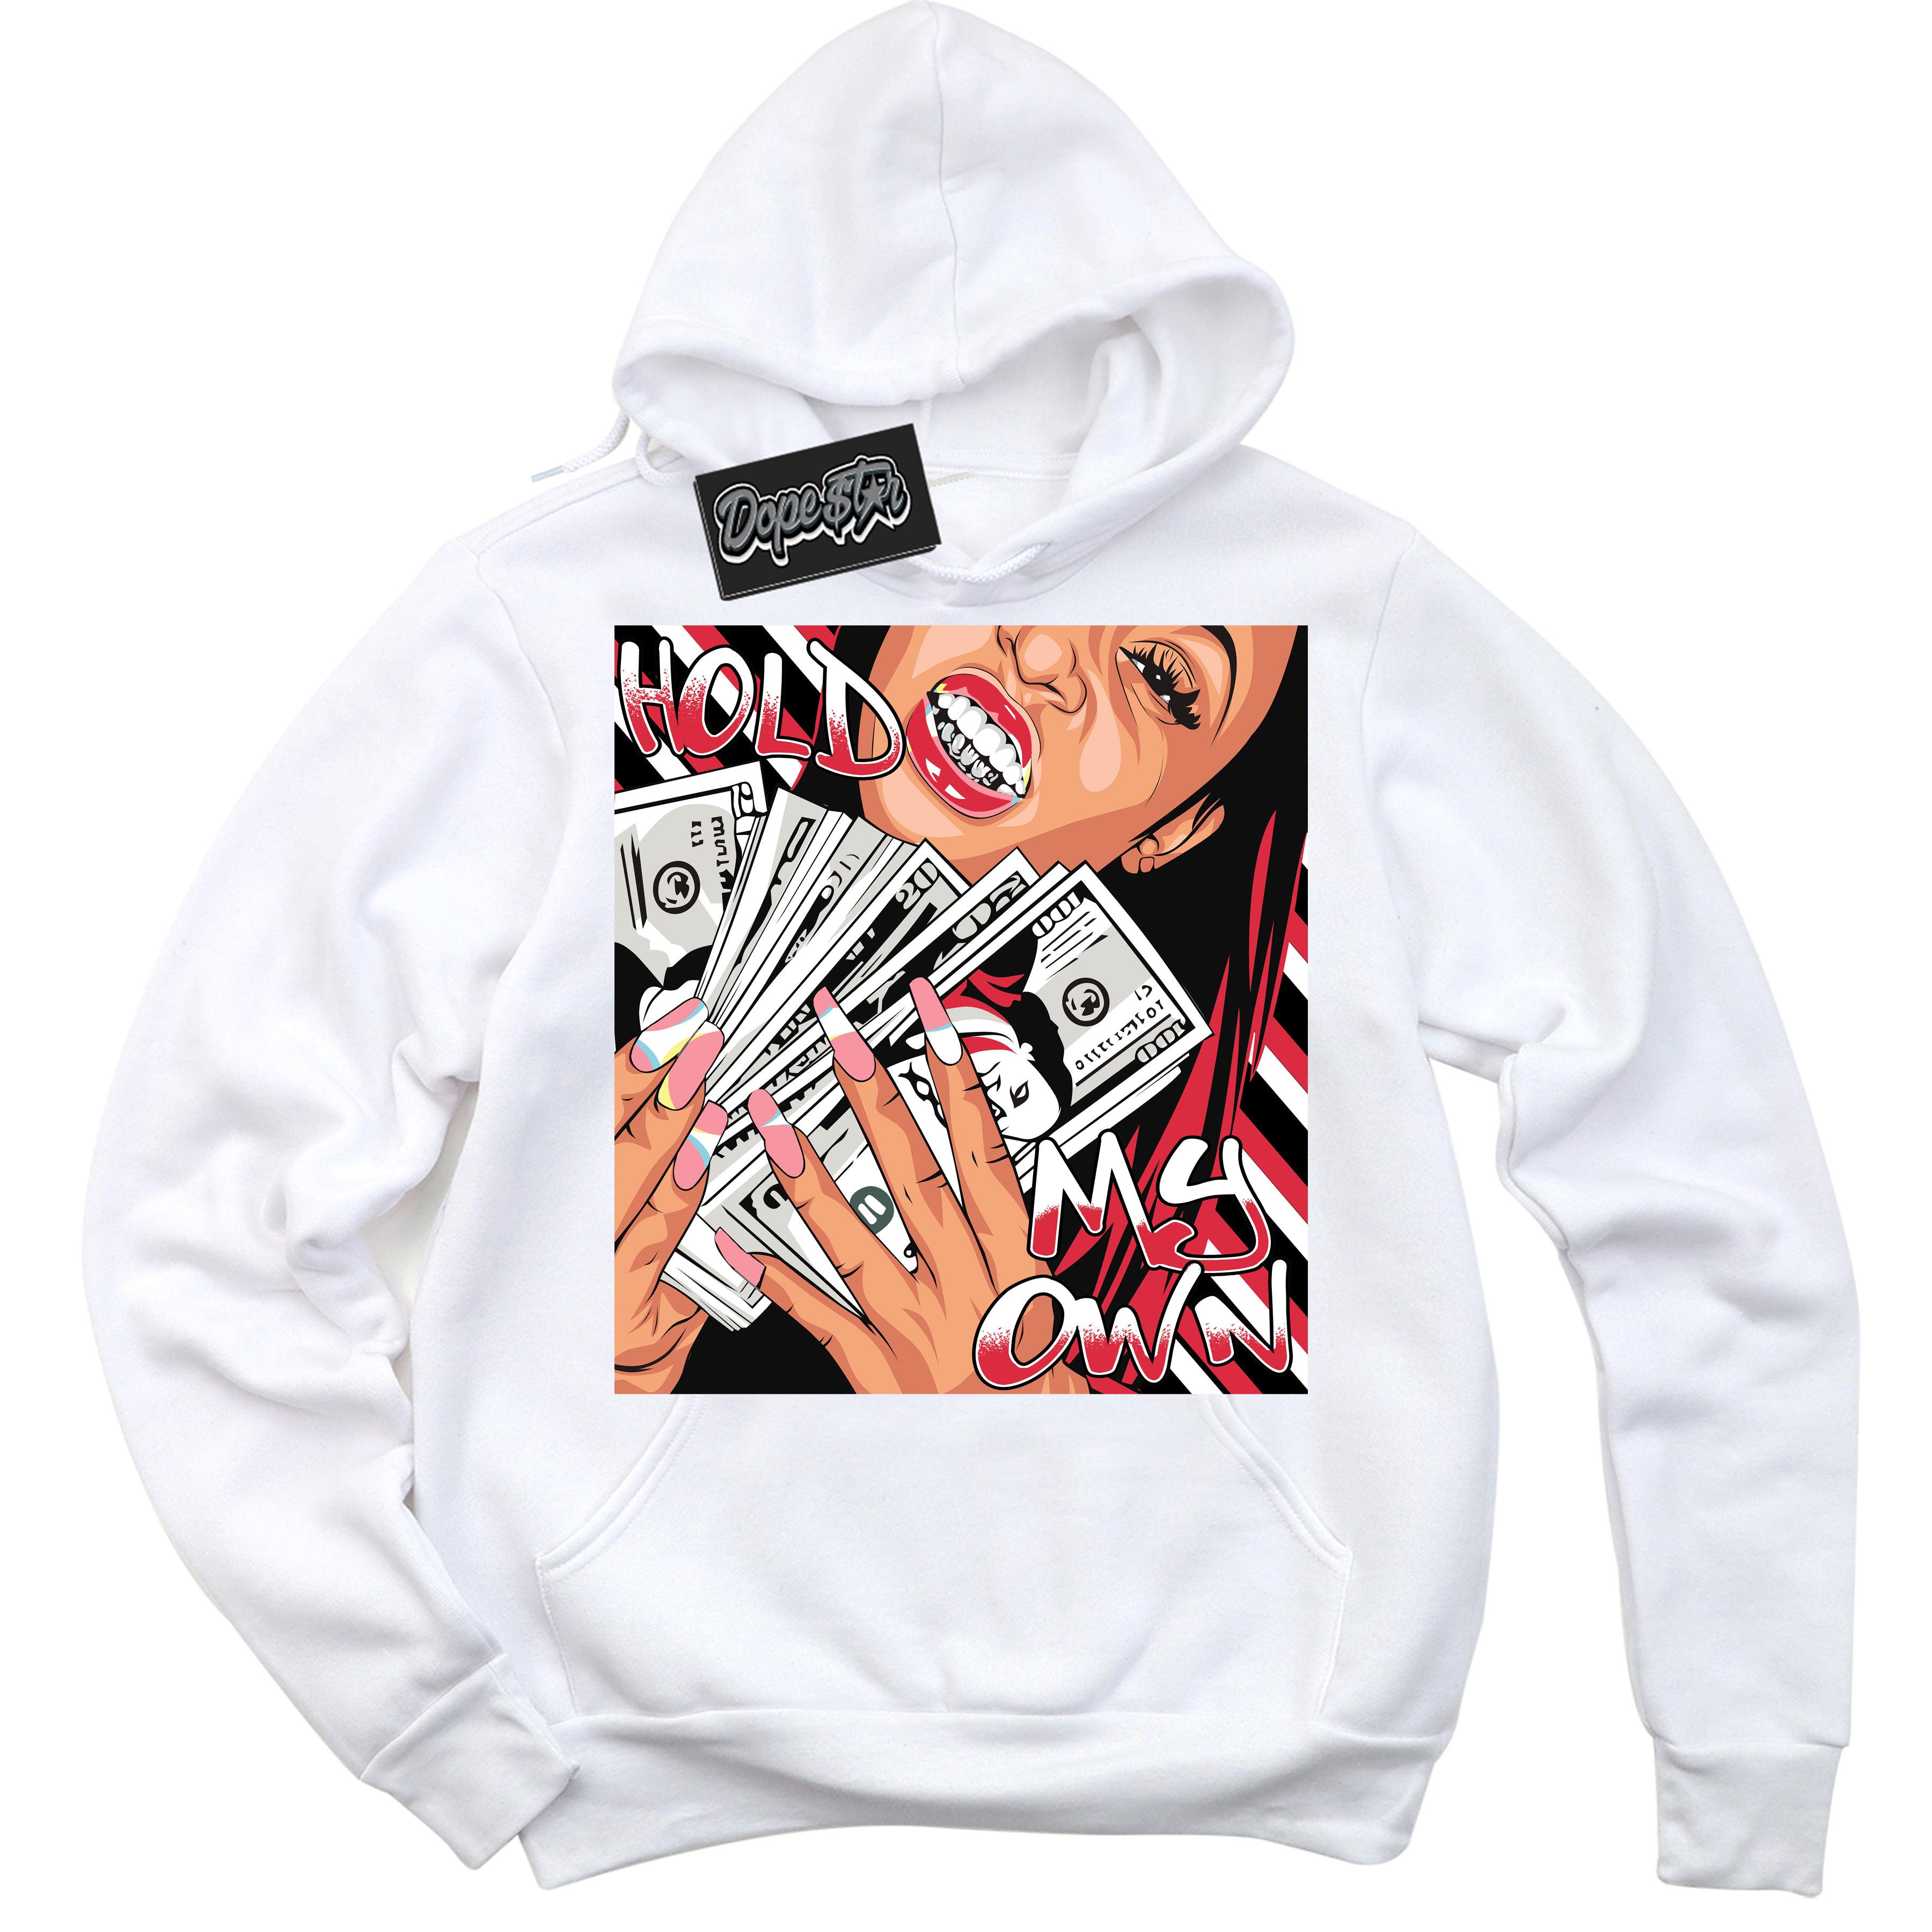 Cool White Graphic DopeStar Hoodie with “ Hold My Own “ print, that perfectly matches Spider-Verse 1s sneakers